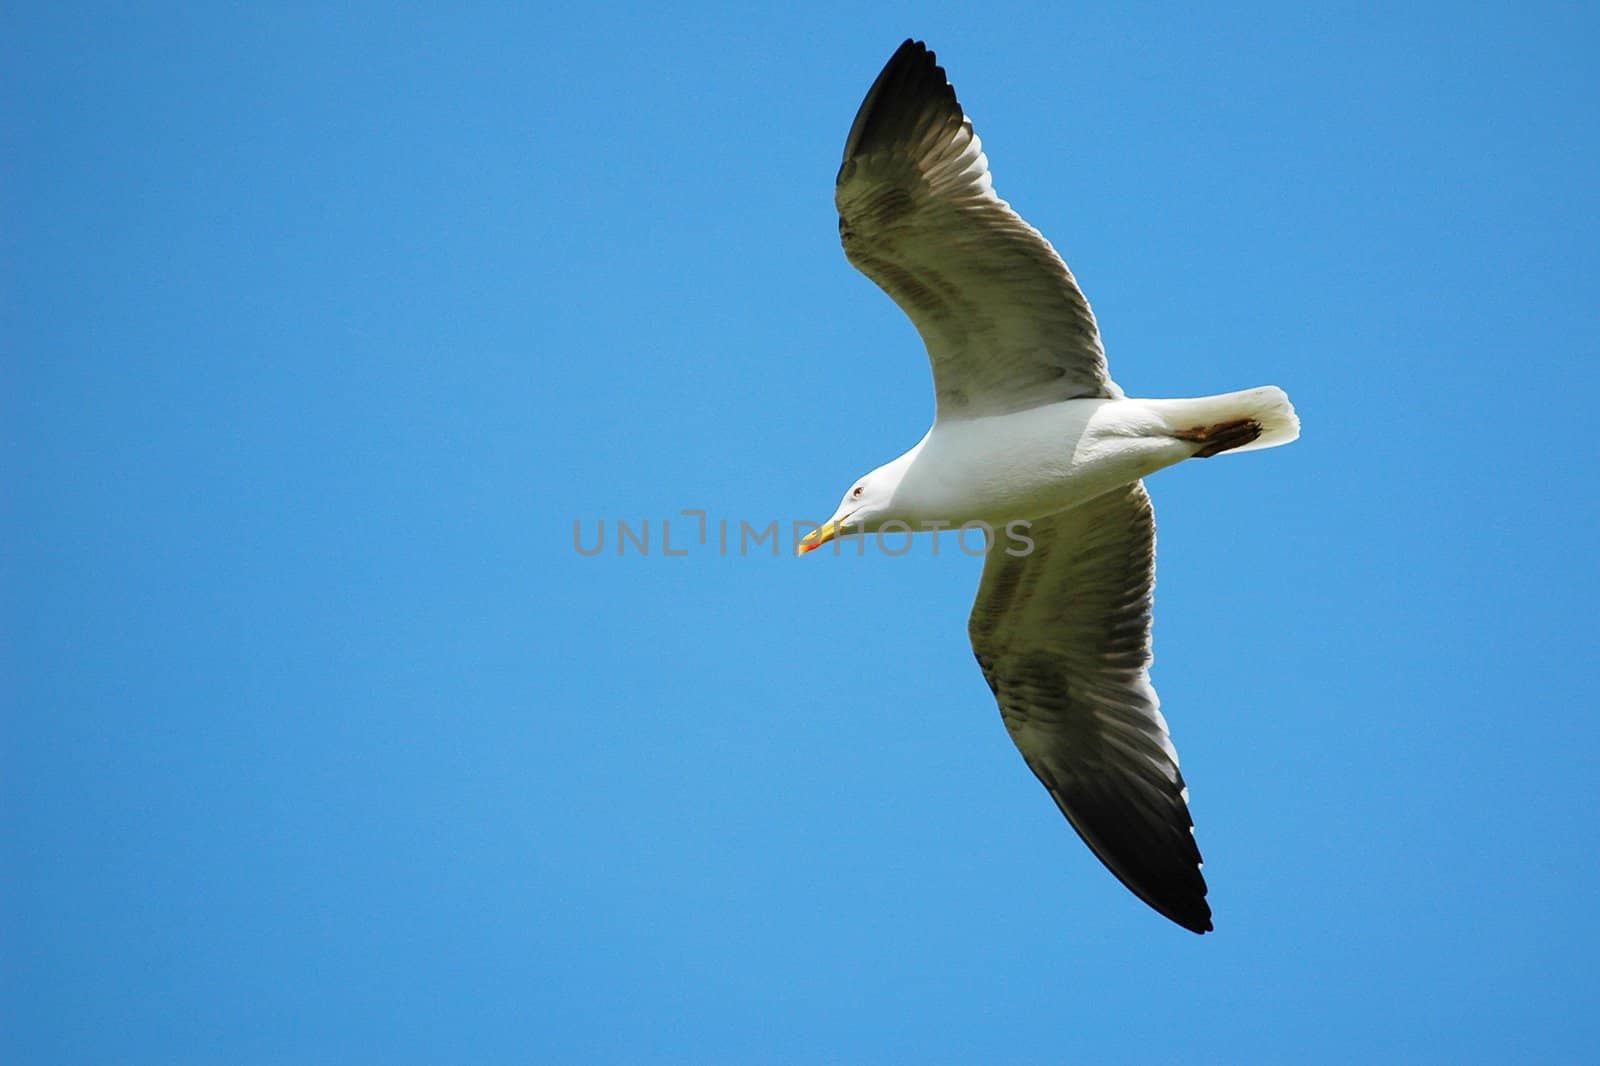 flying sea gull on the blue sunny sky without clouds, view from below